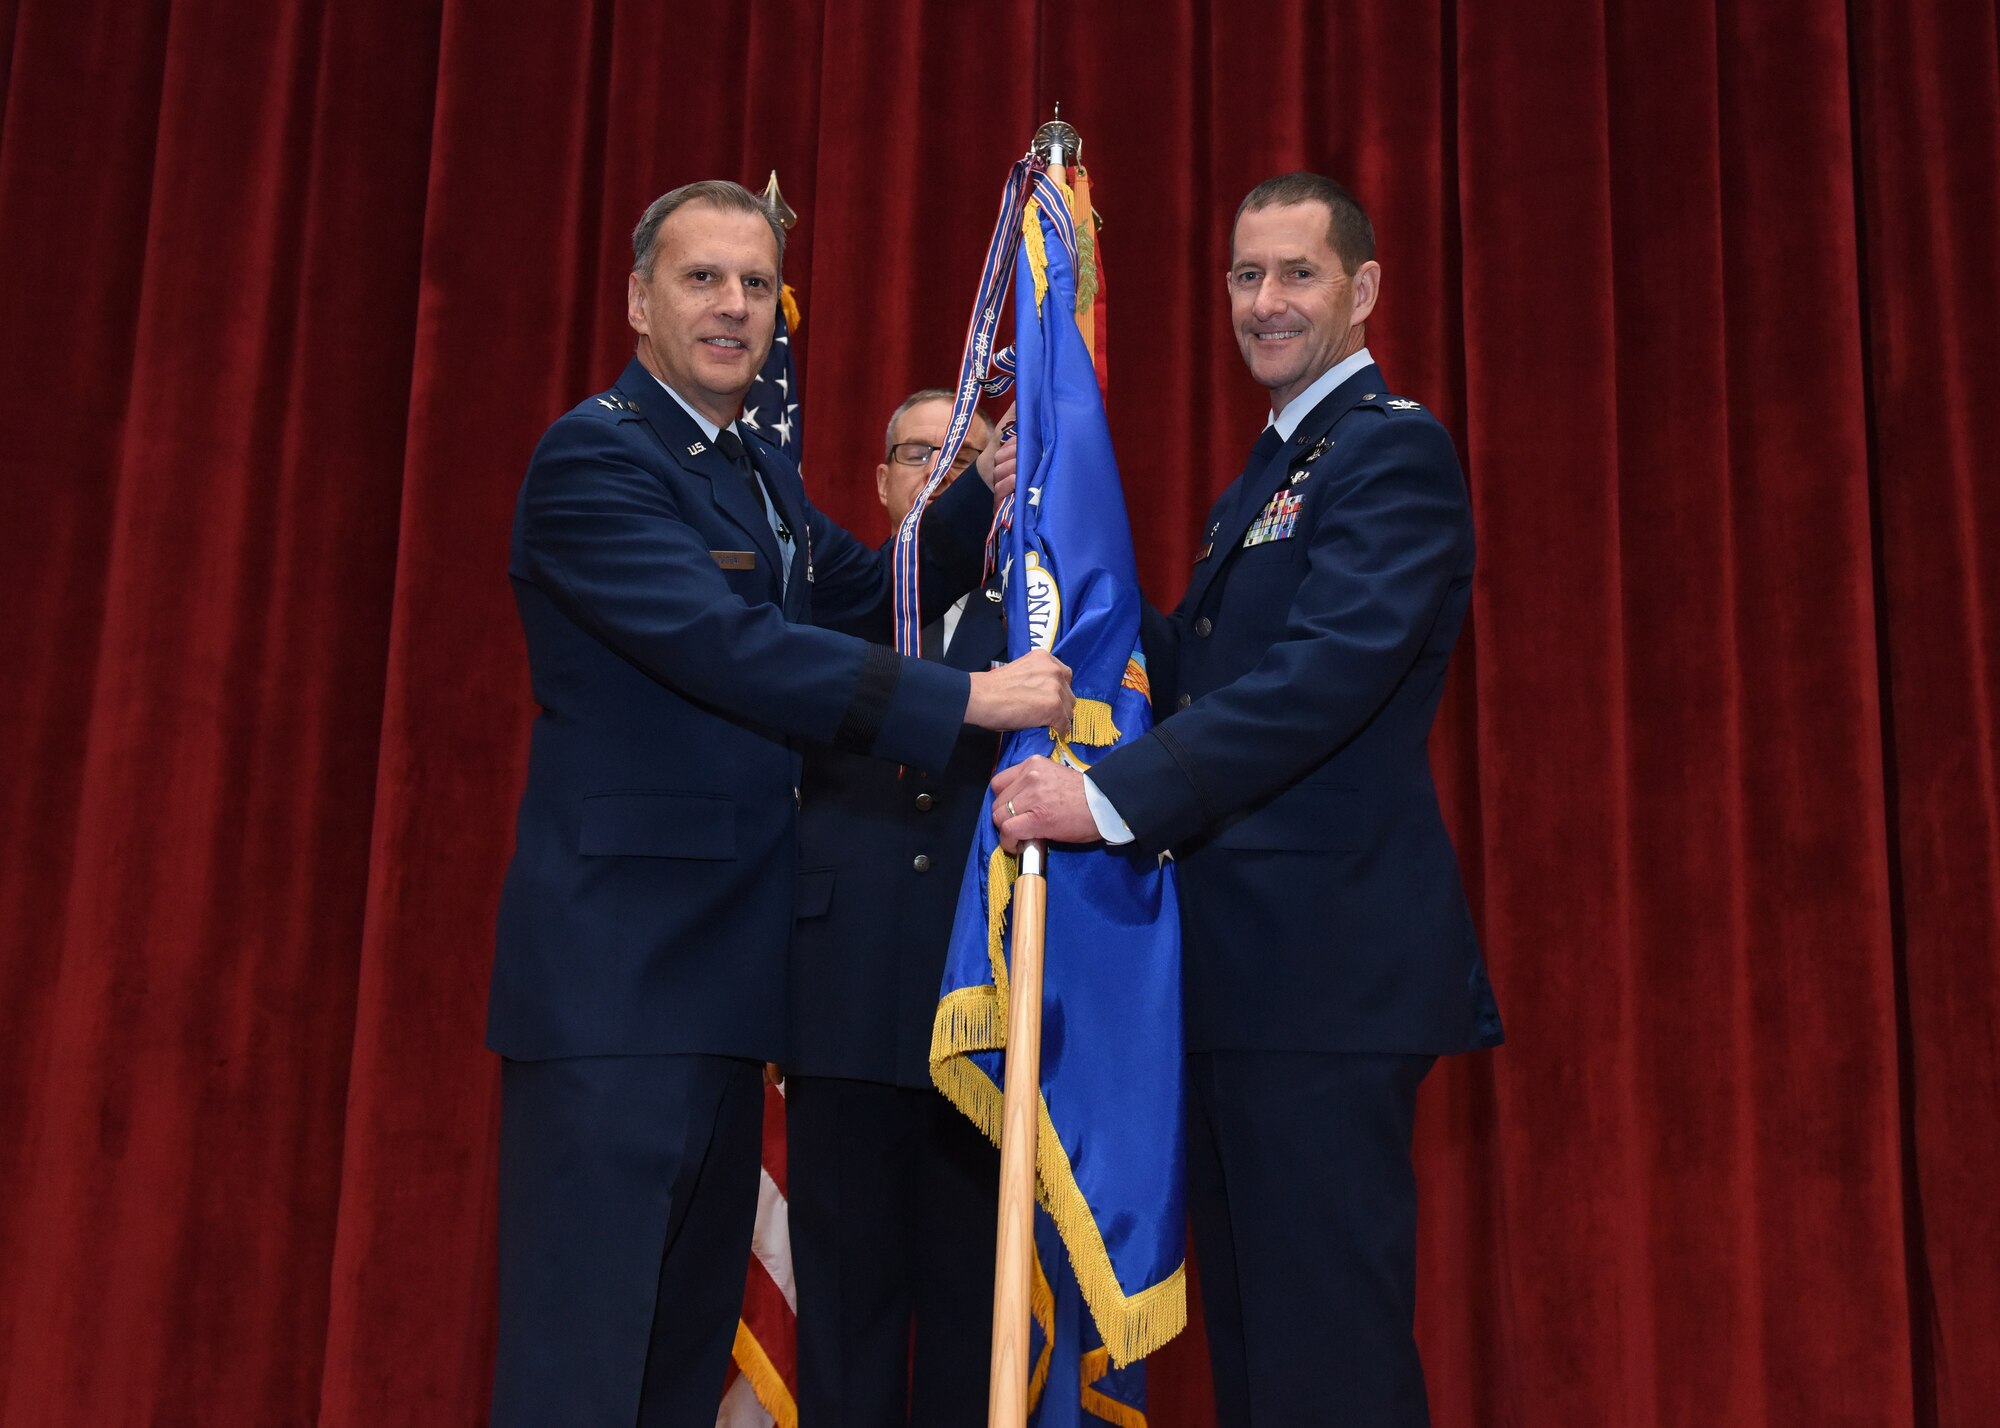 Maj. Gen. Randall A. Ogden, 4th Air Force commander, passes the 911th Airlift Wing guidon to the incoming commander, Col. John F. Robinson, during an assumption of command ceremony at Moon Area Middle School in Coraopolis, Pennsylvania, Nov. 2, 2019.